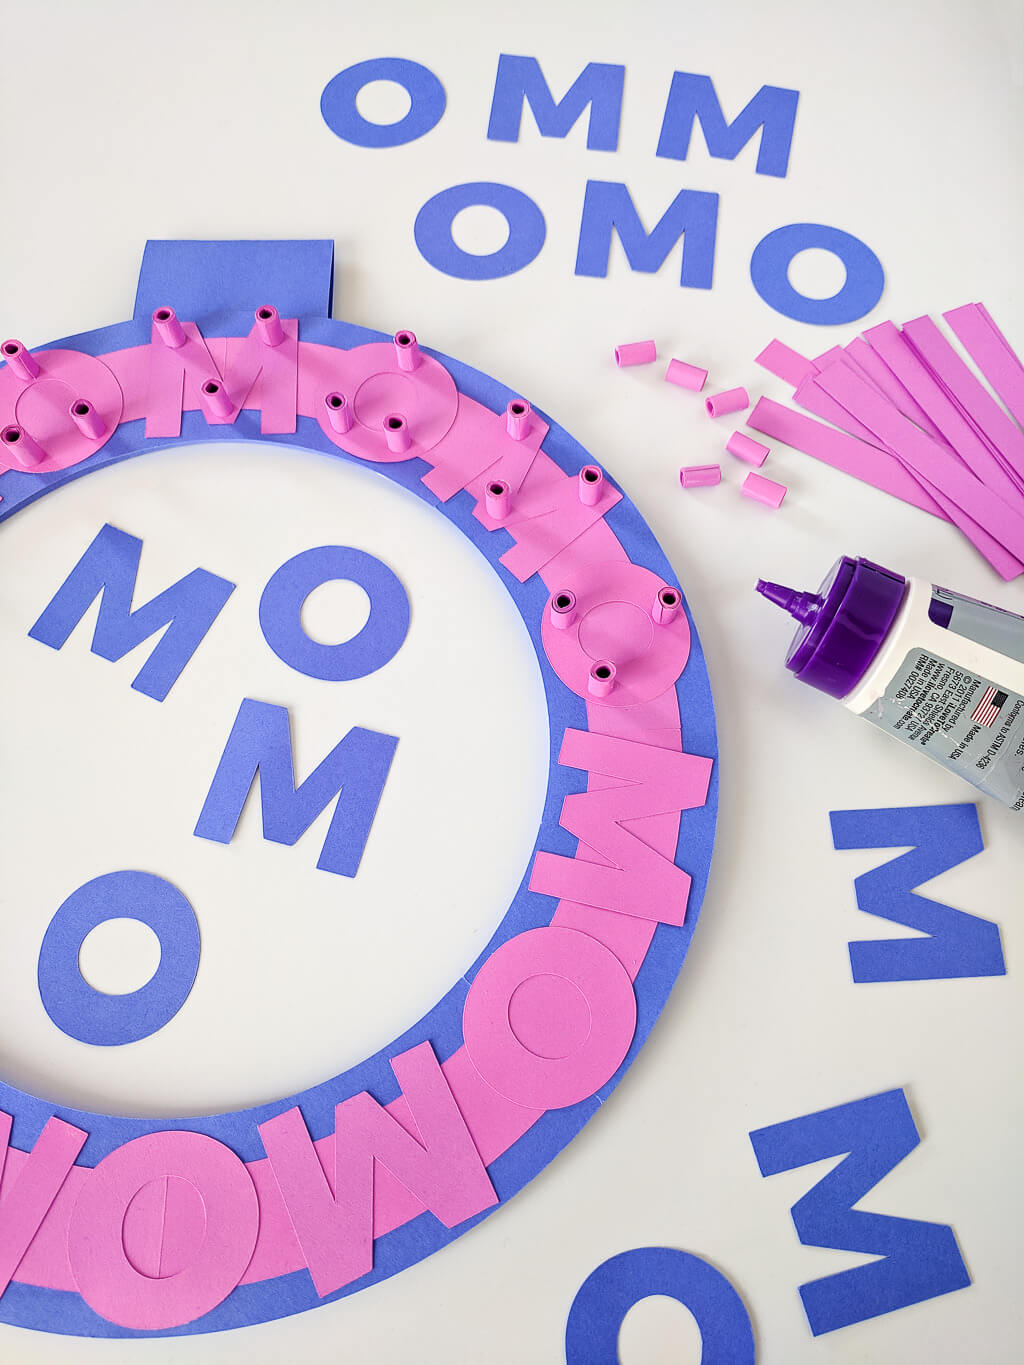 How to make a Mother's Day wreath